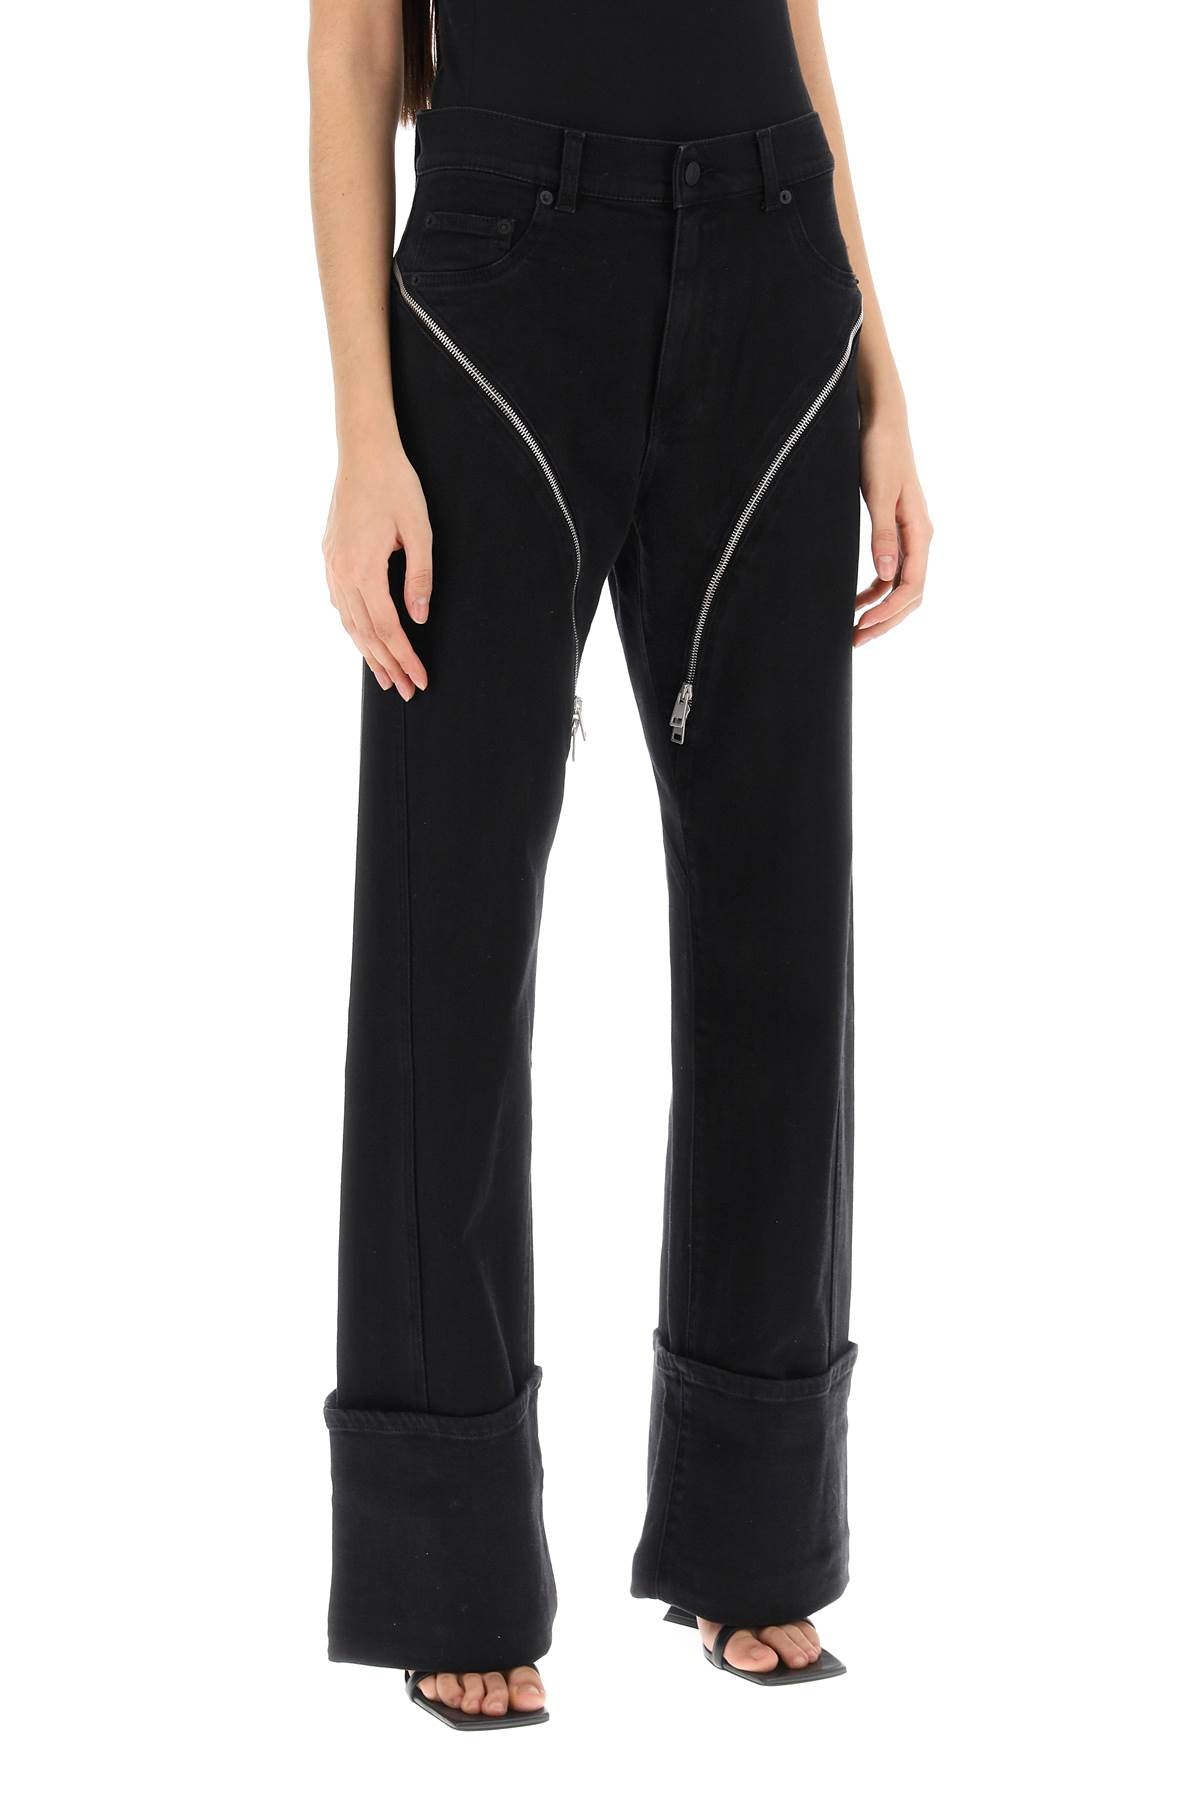 Mugler straight jeans with zippers-1